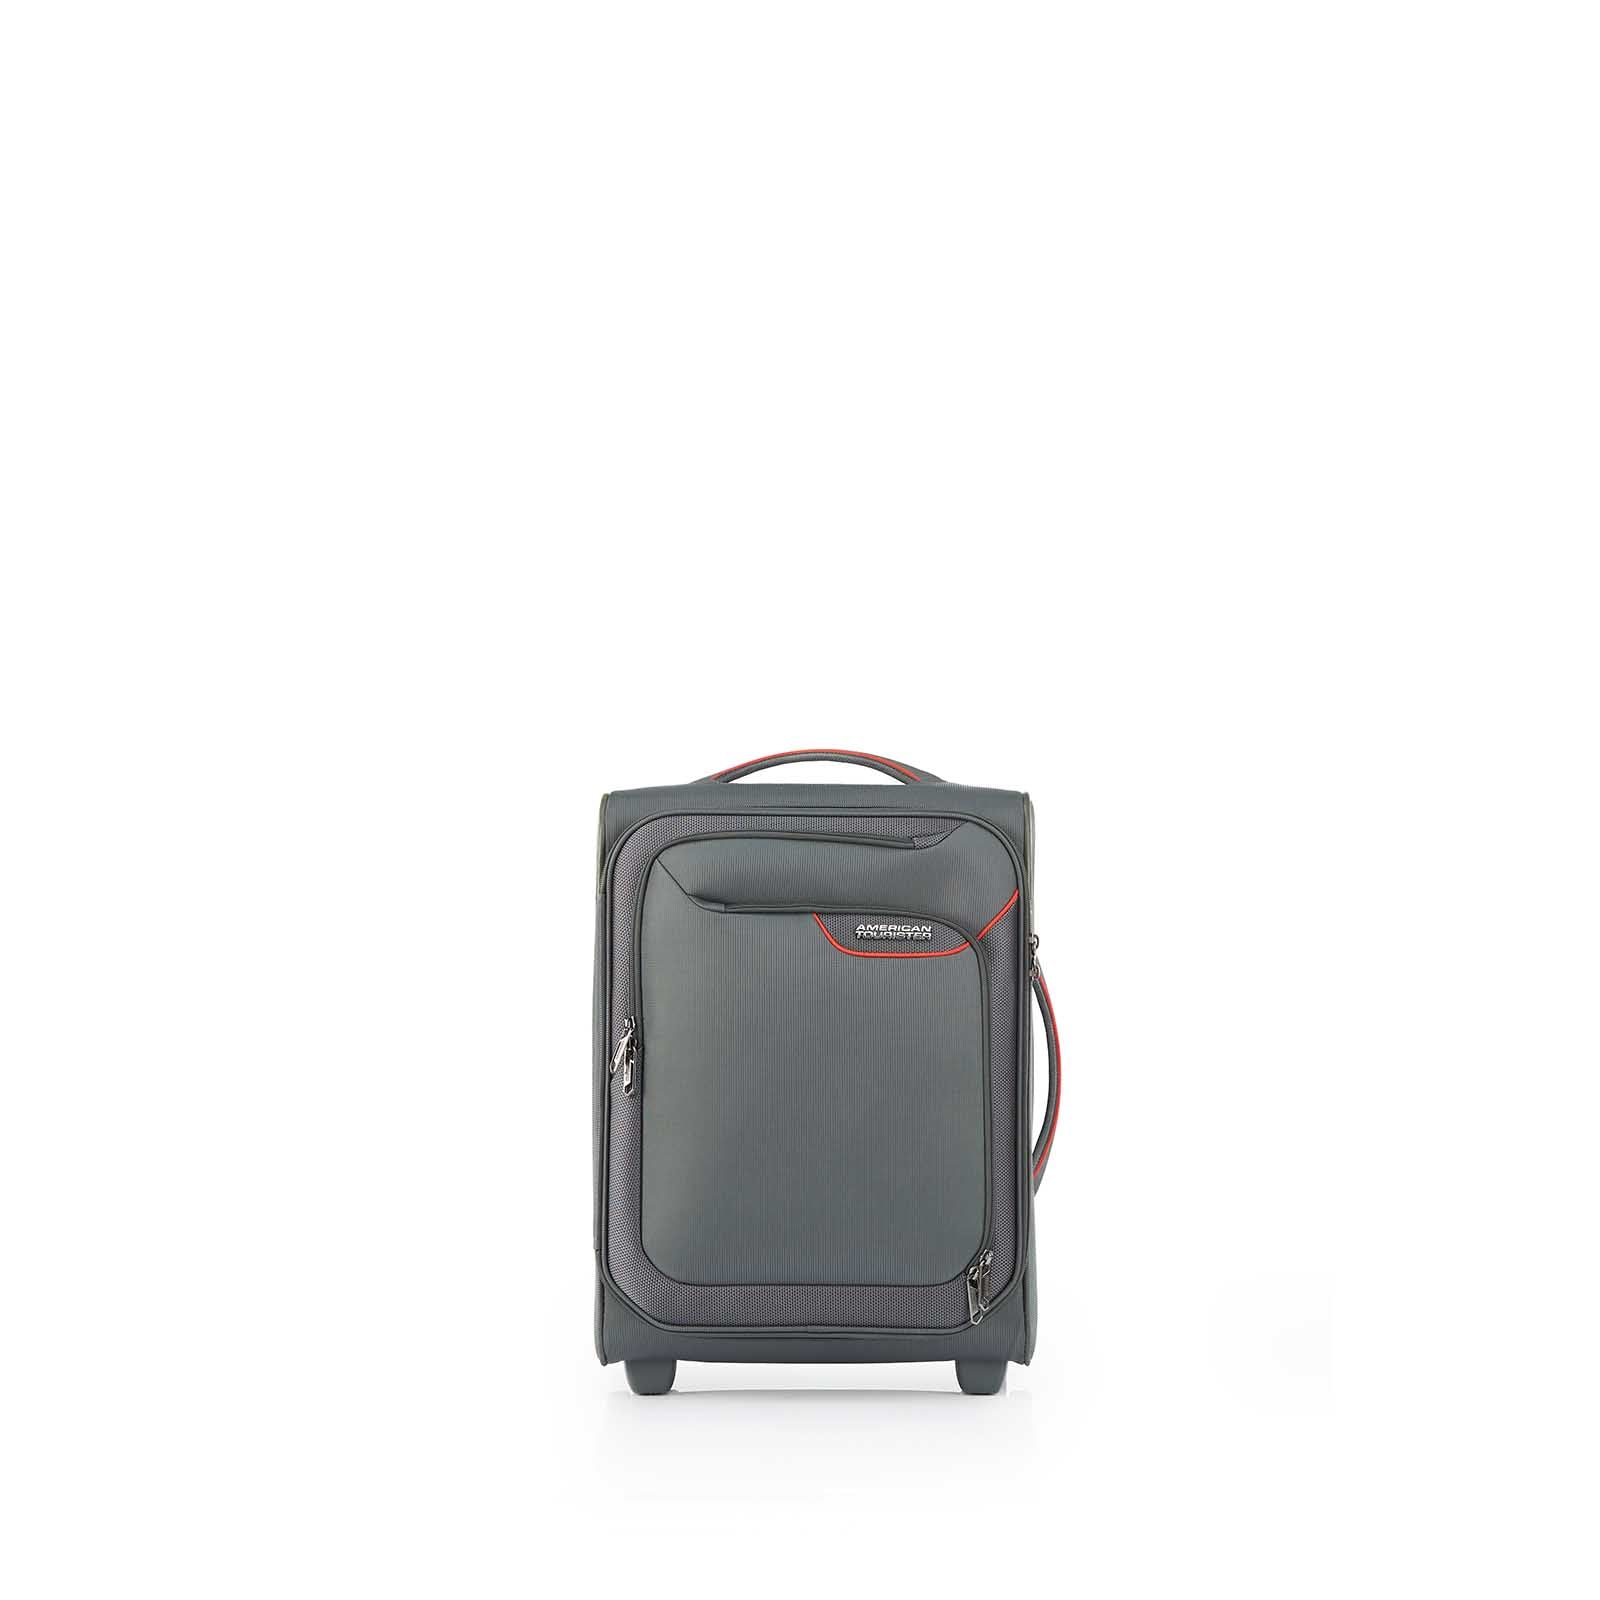 American-Tourister-Applite-4-Eco-50cm-Carry-On-Suitcase-Grey-Red-Front